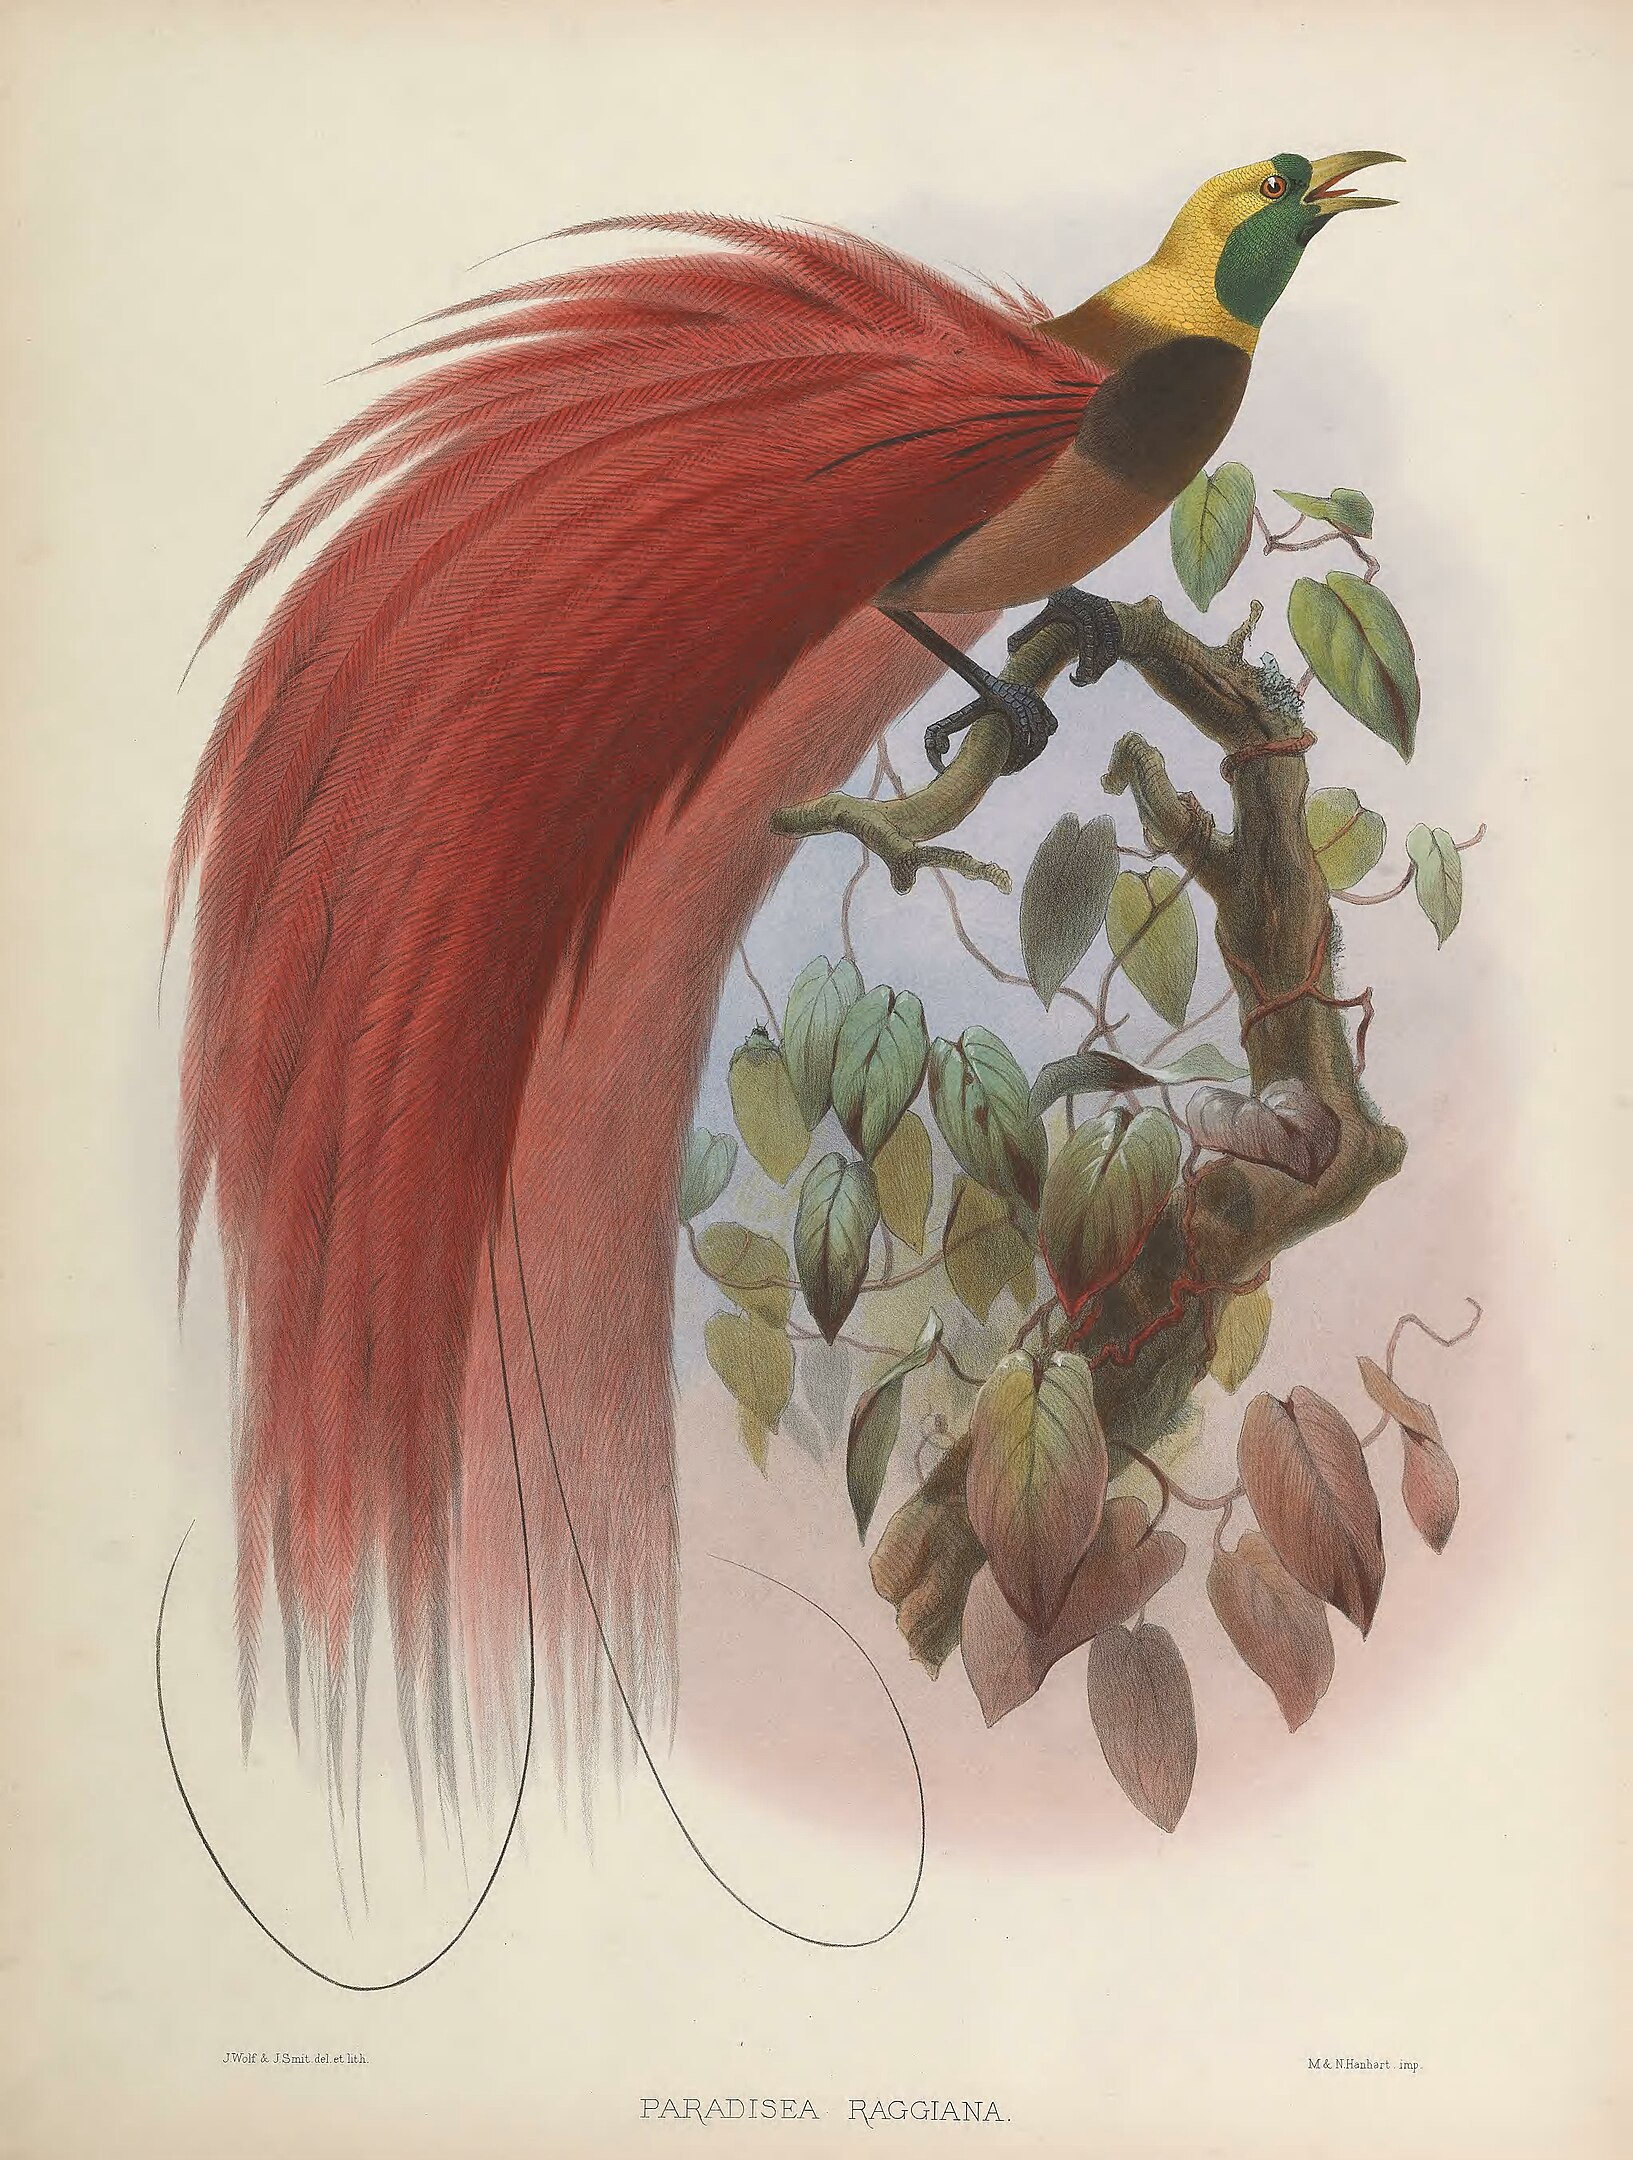 An illustration of an exotic bird on a tree